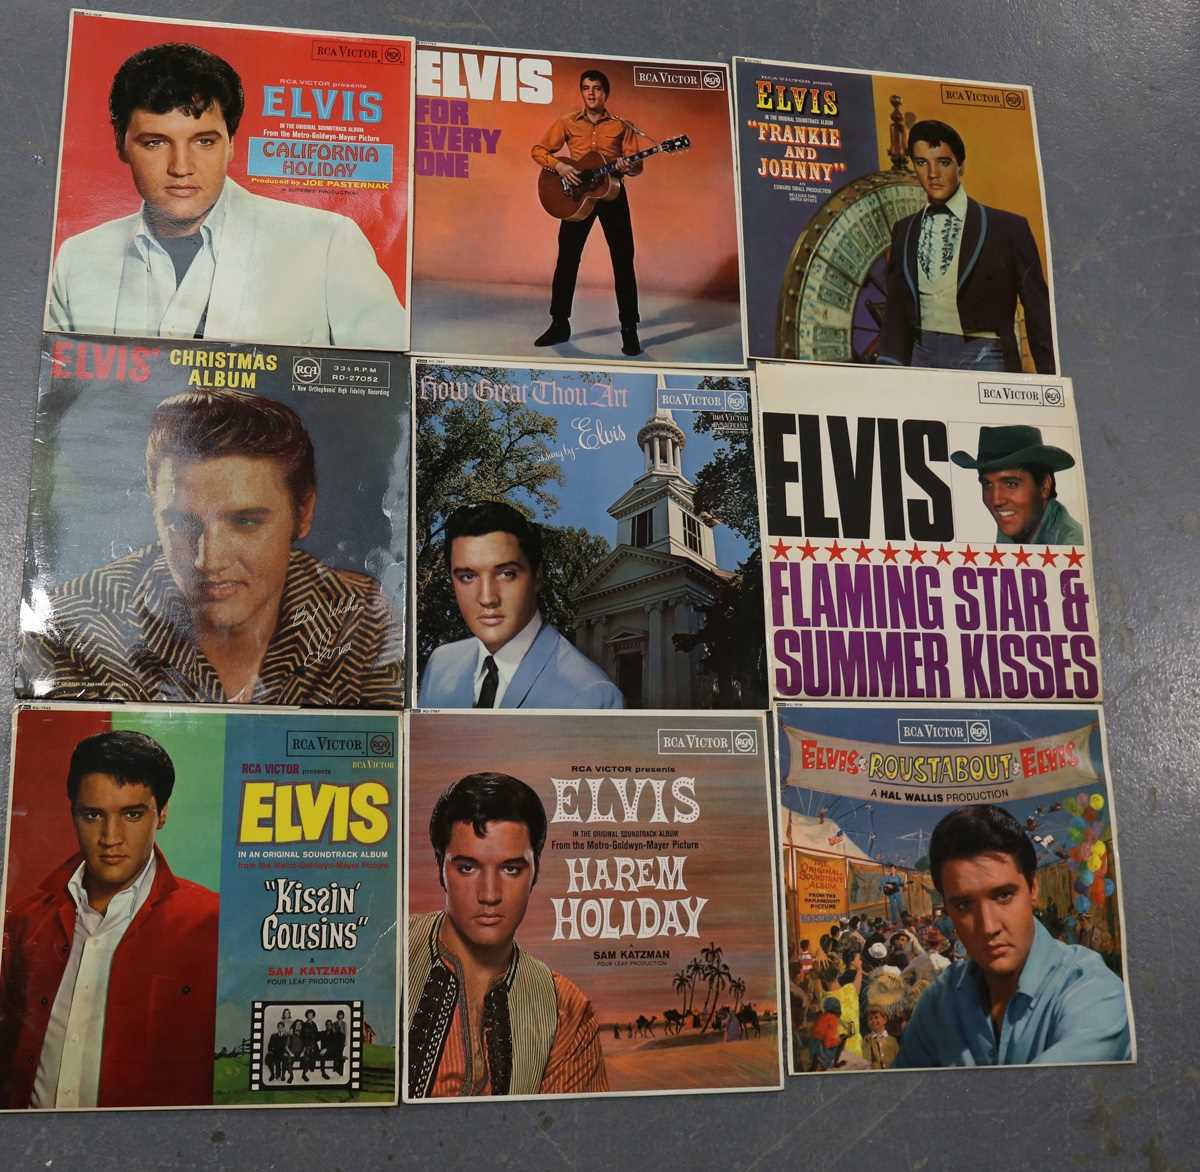 A collection of fifty-two LP records, including seventeen albums by Elvis Presley, all 1960s mono